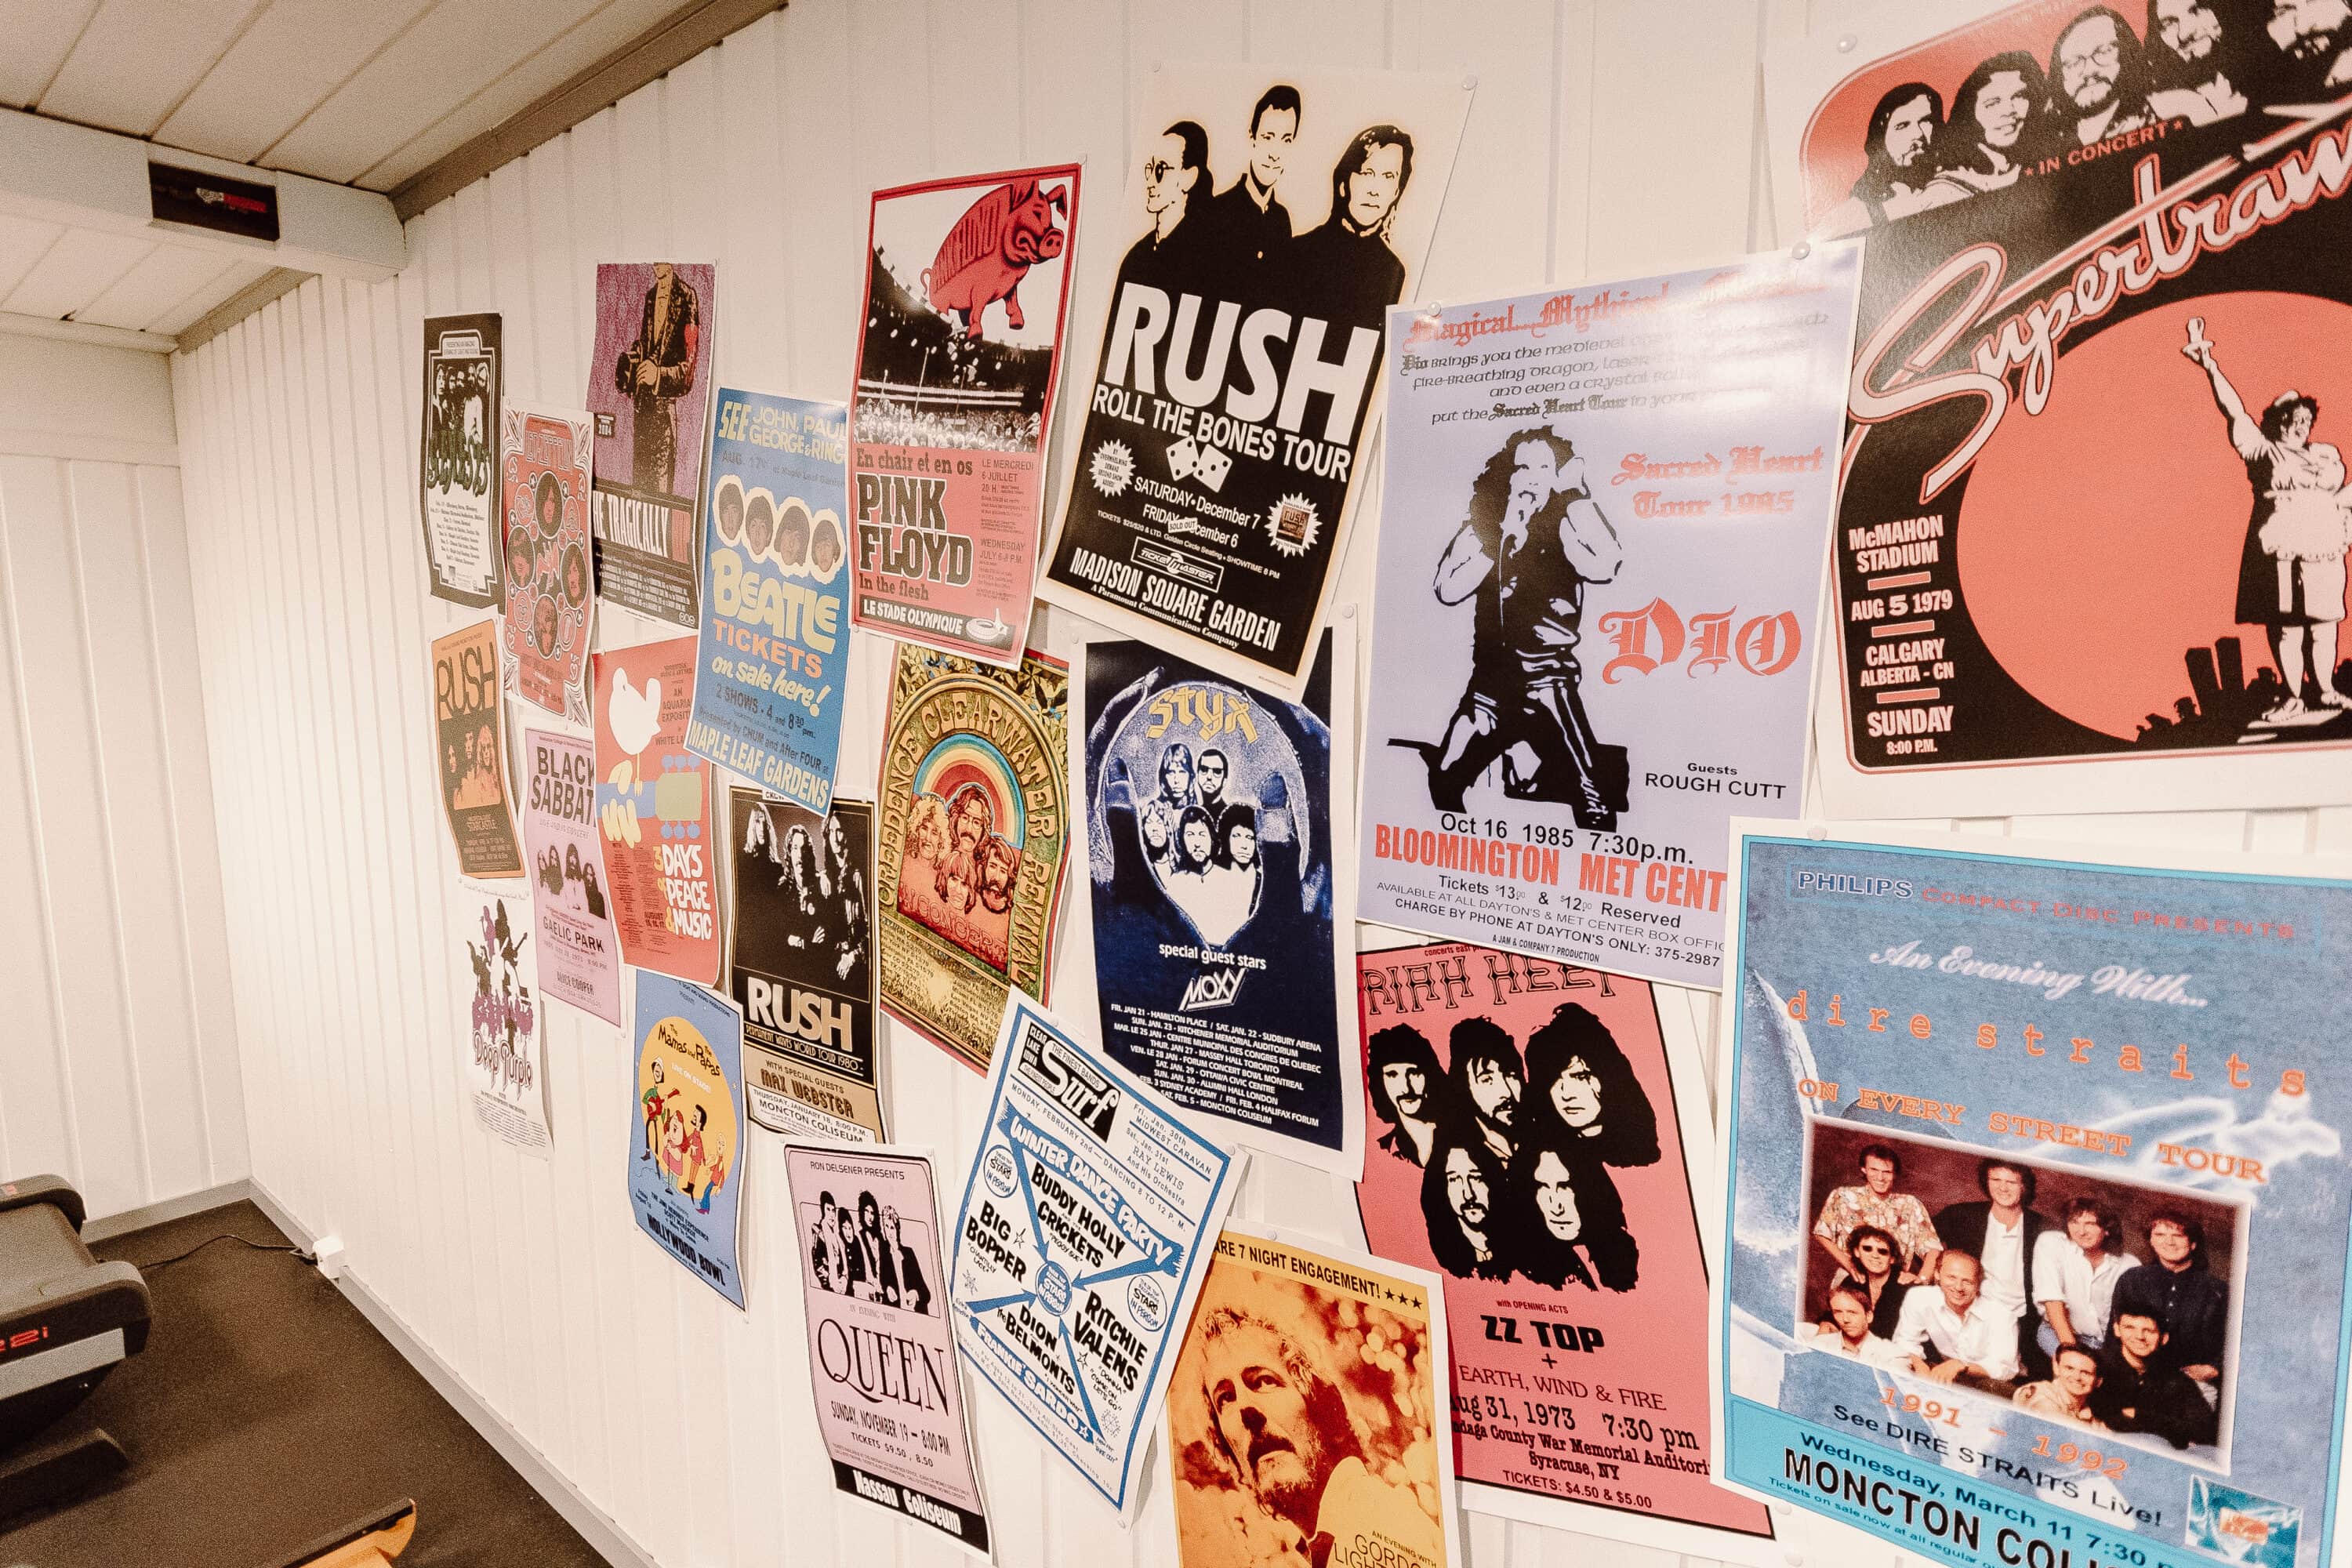 Cool music posters on the wall